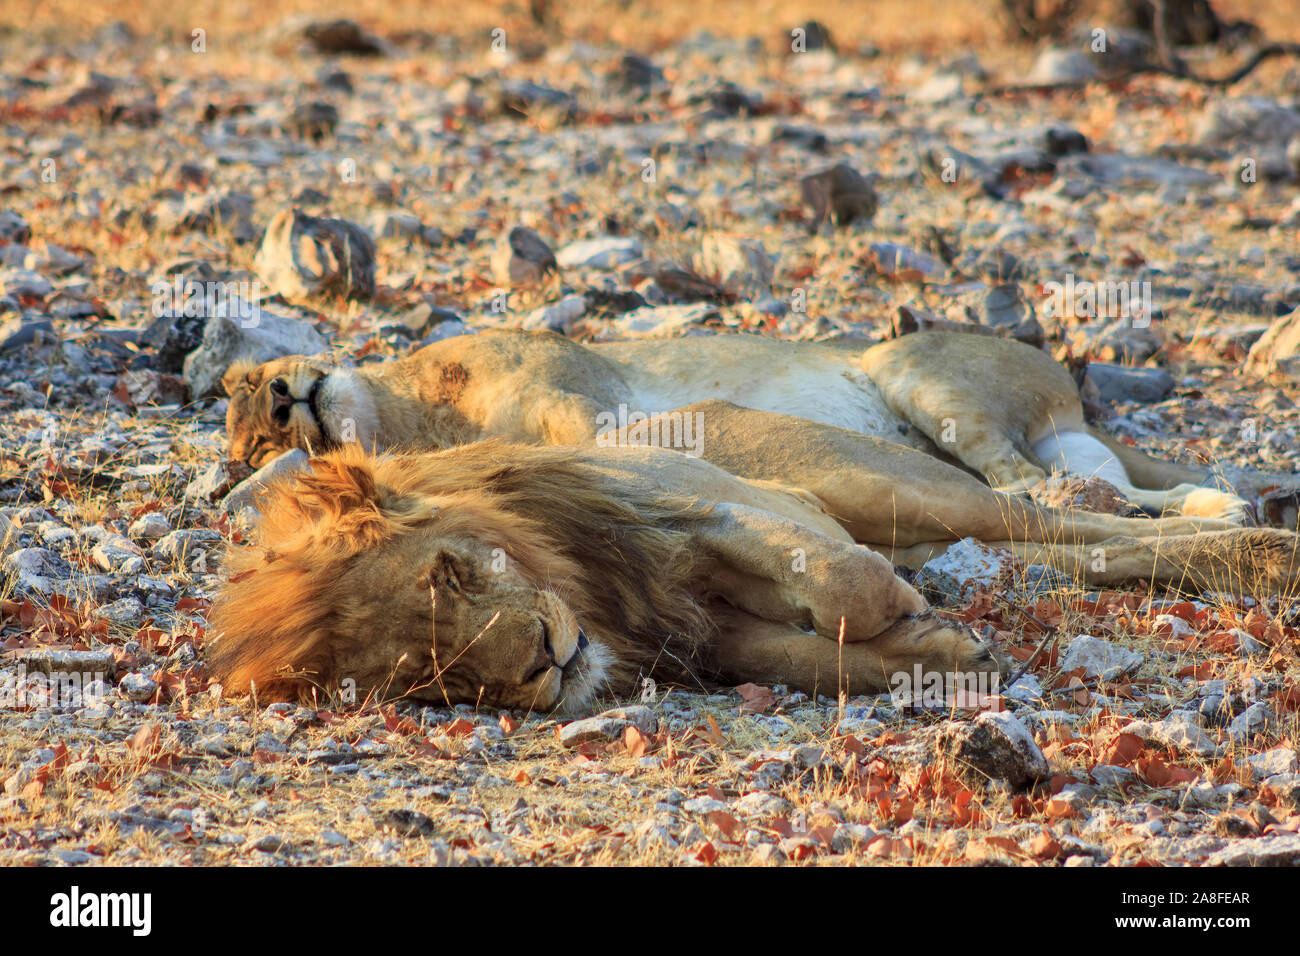 Male and female lion sleeping side by side in Etosha National Park in Namibia, Africa Stock Photo